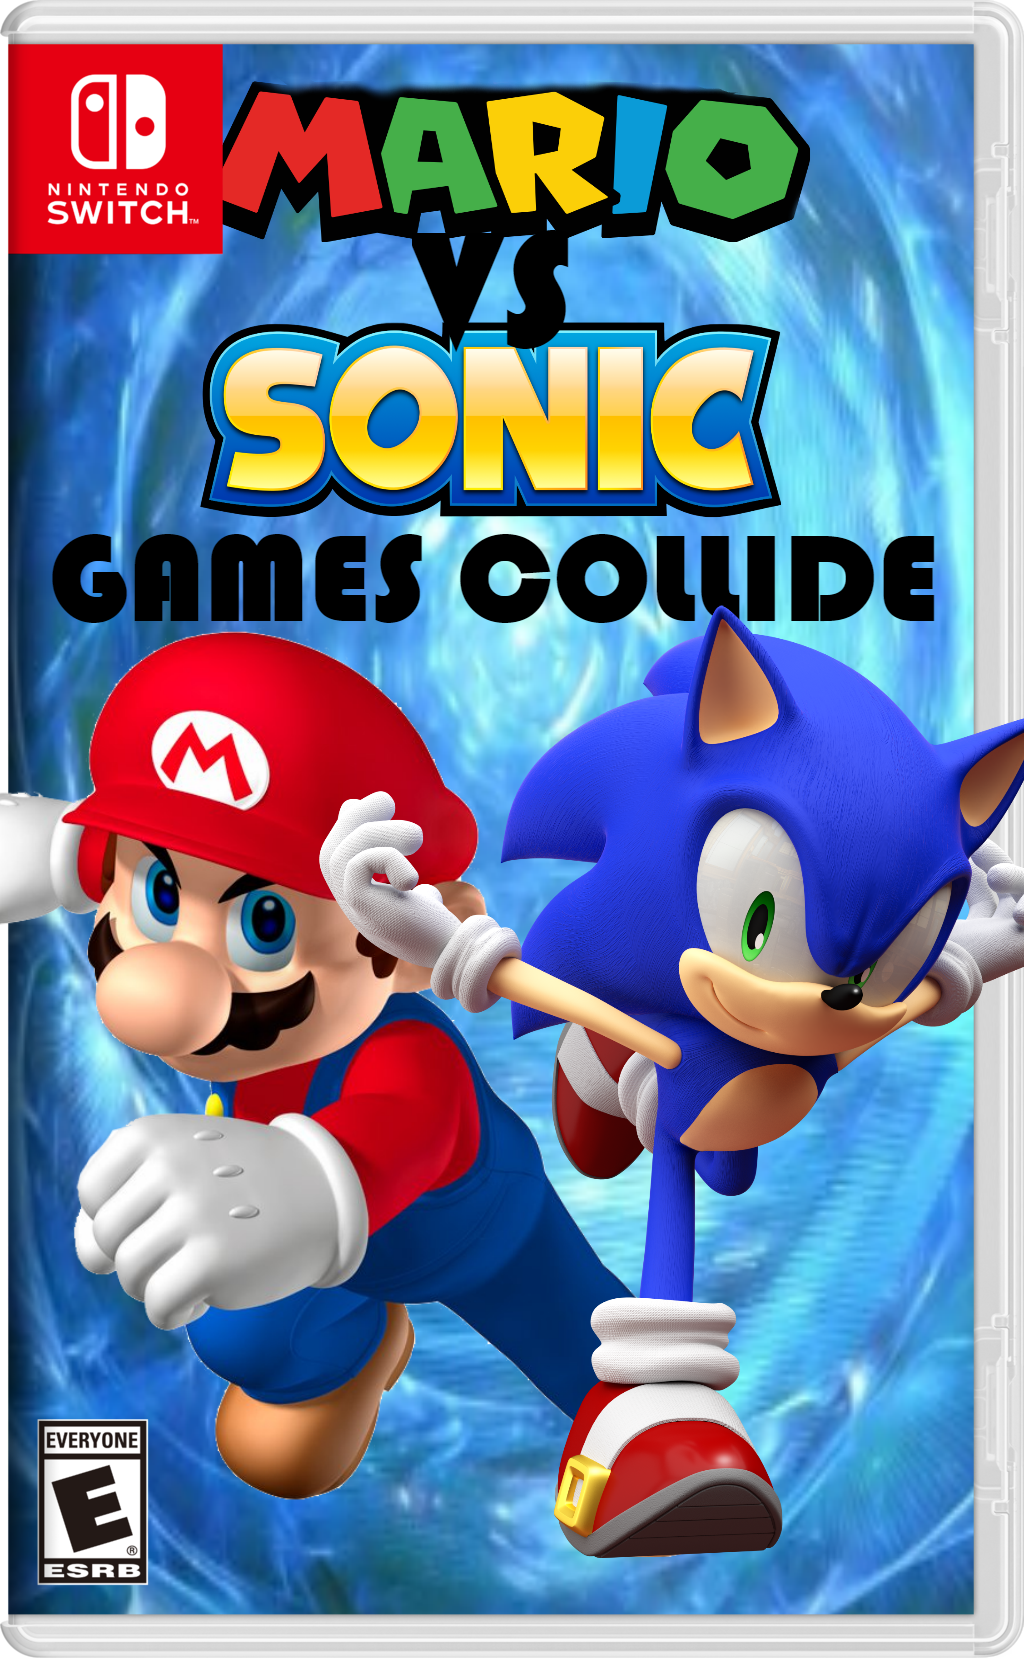 all sonic games on switch